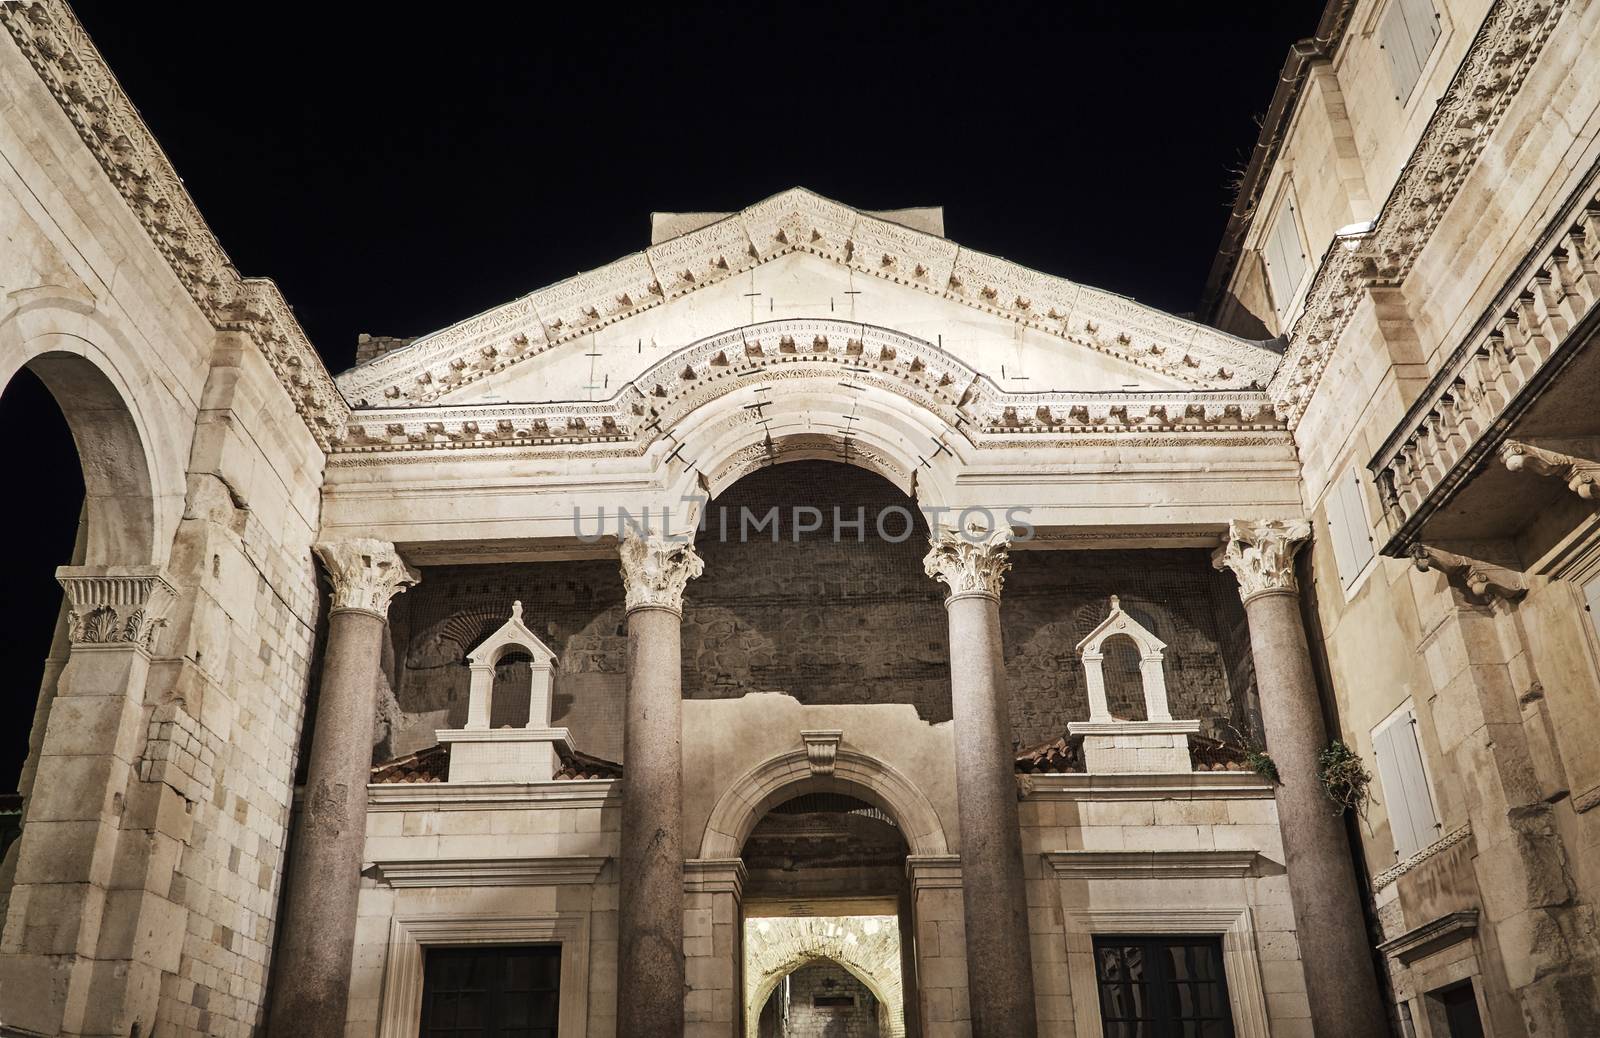 Stone buildings of the Diocletian palace in the city of Split, Croatia